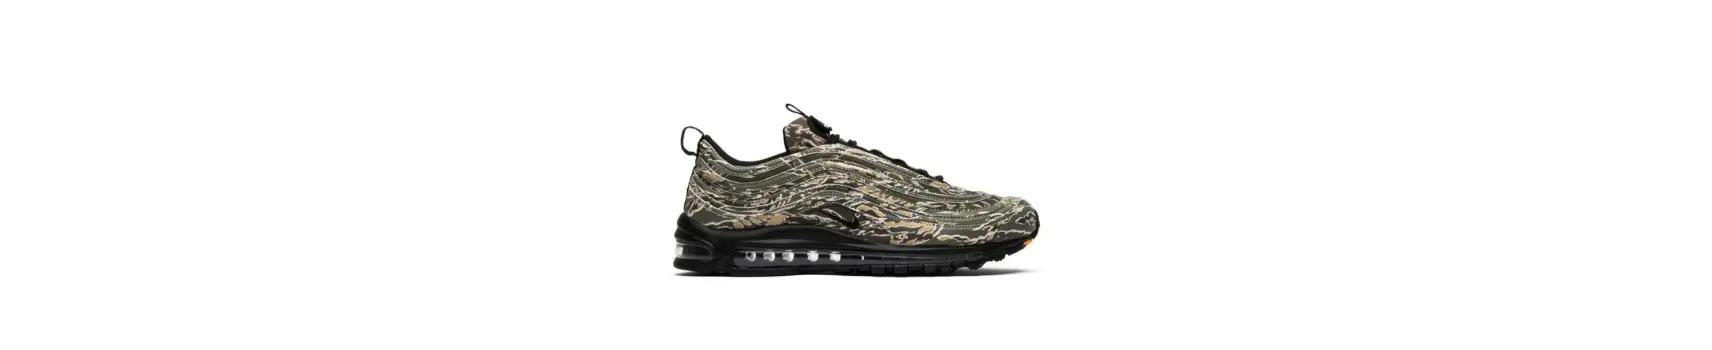 Nike Air Max 97 I Achat chaussure I Polestore I Sneakers limitée